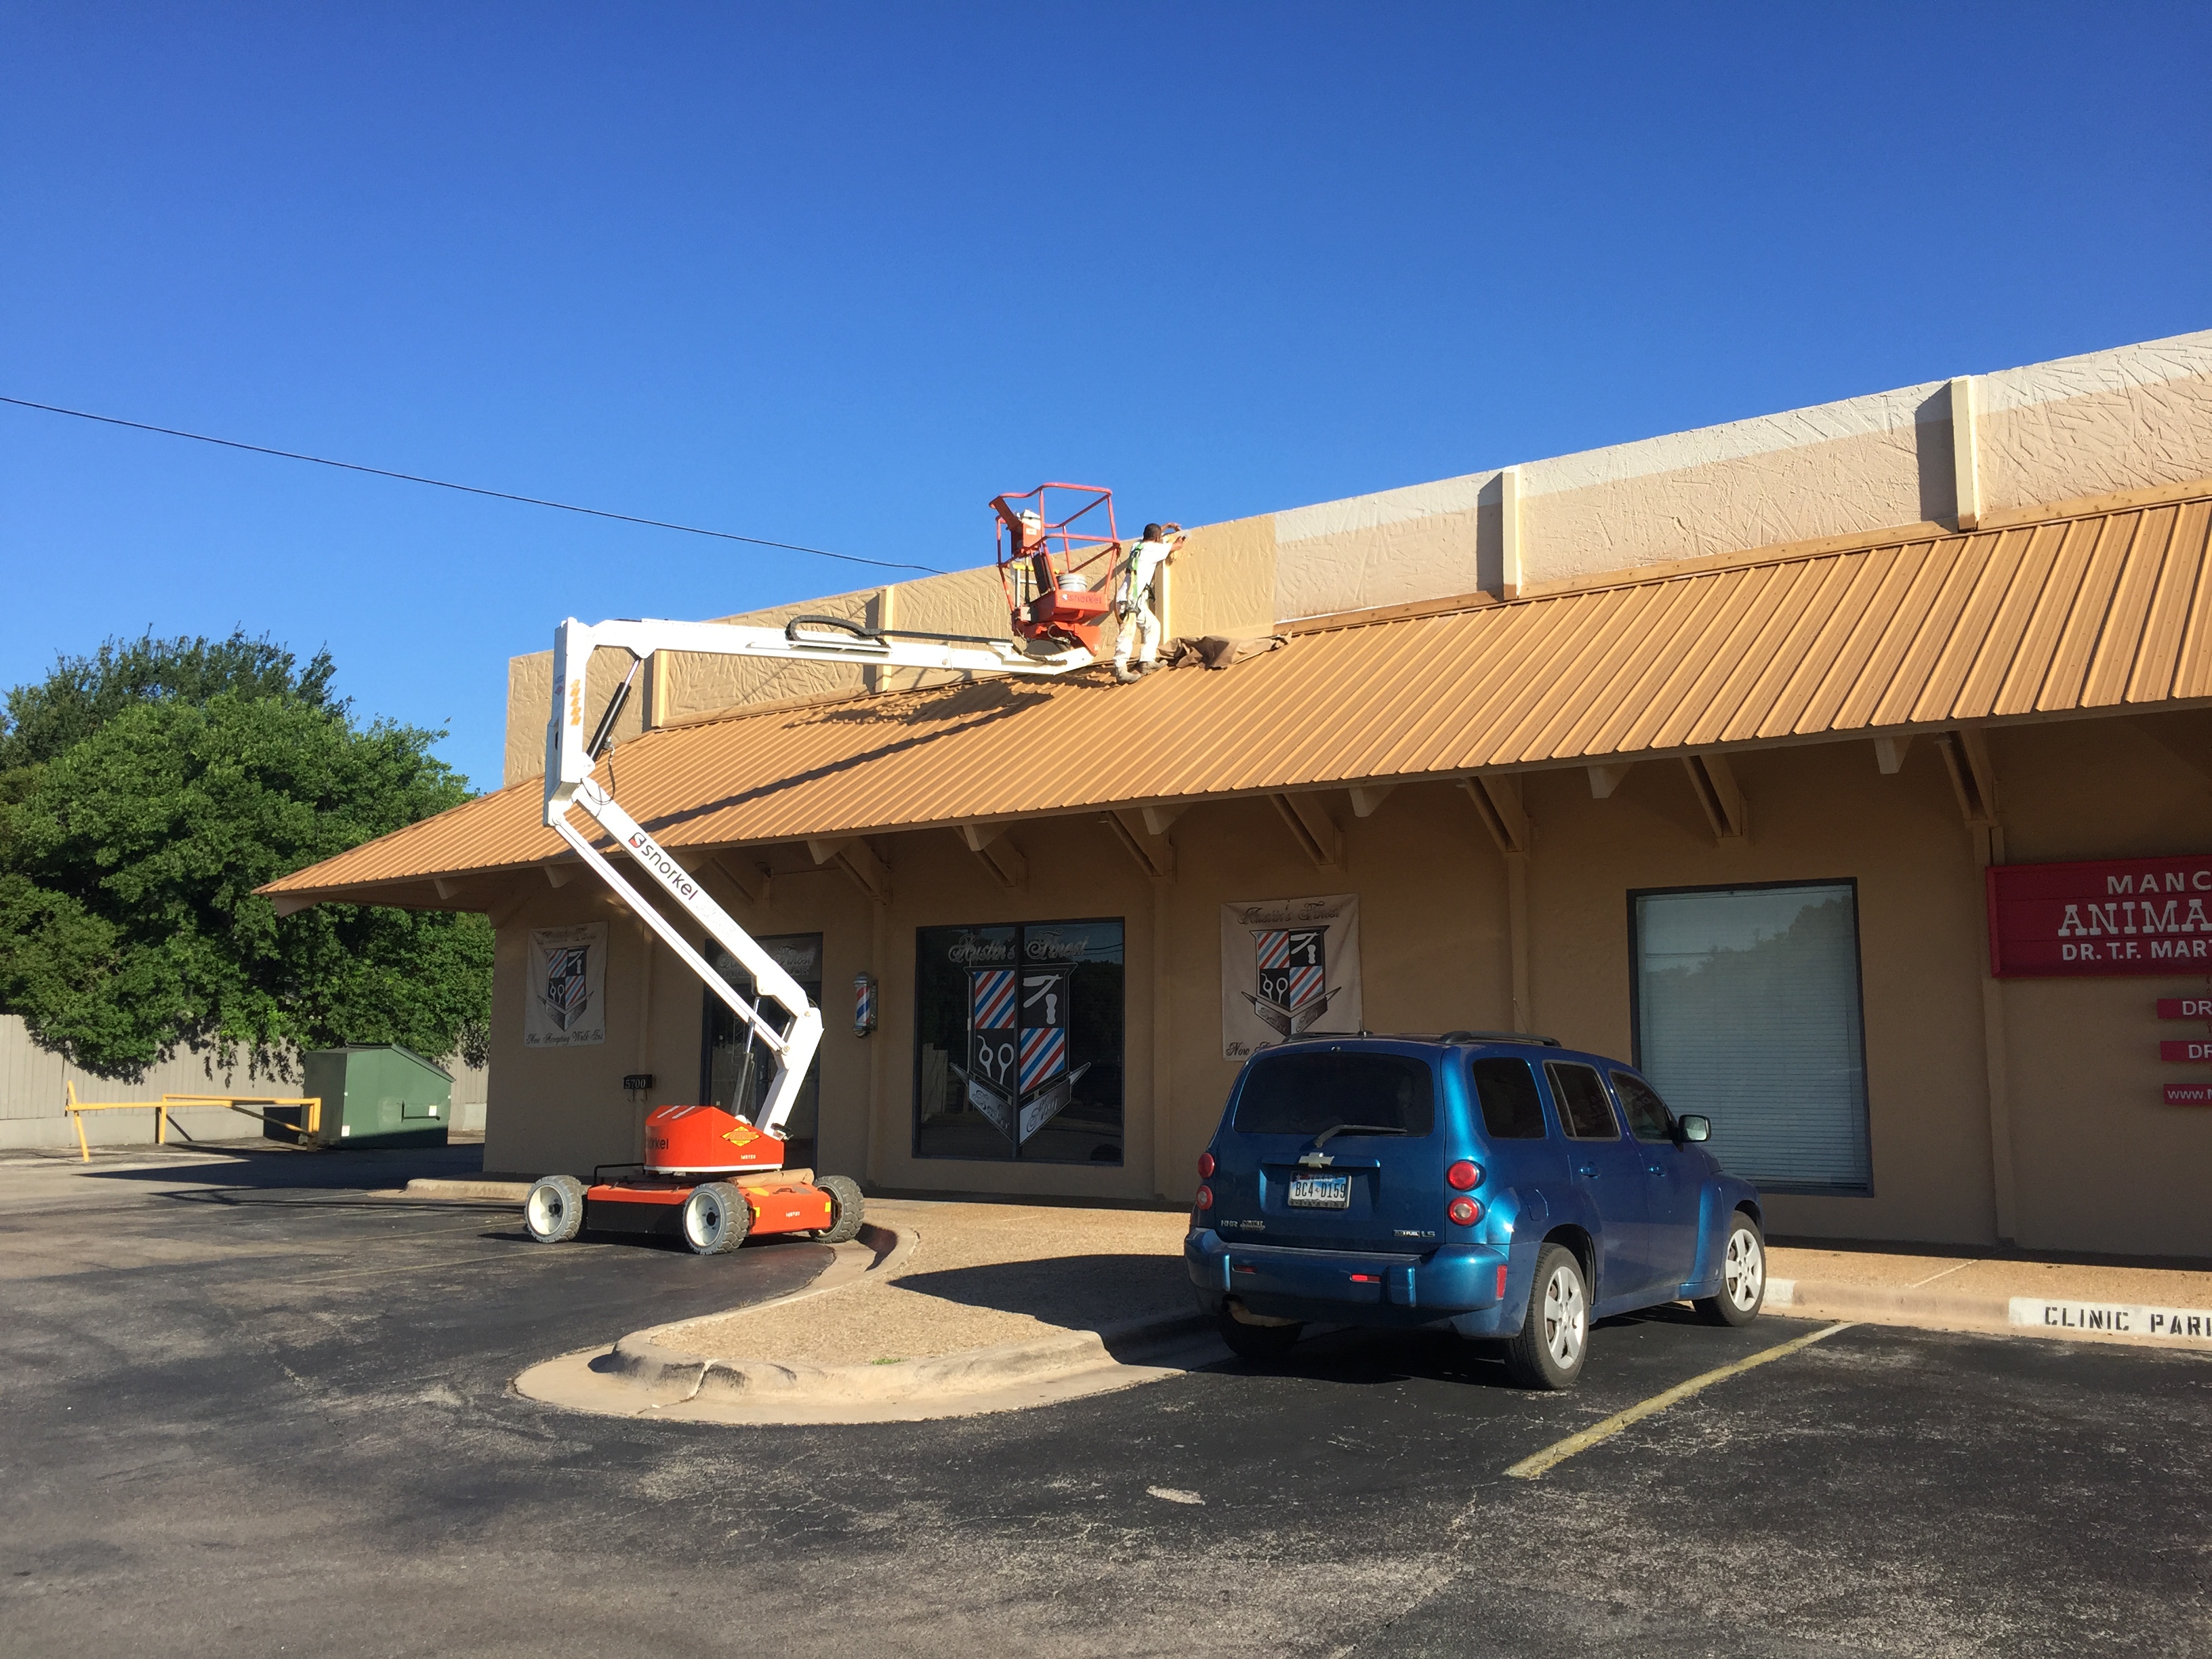 Retail building being painted